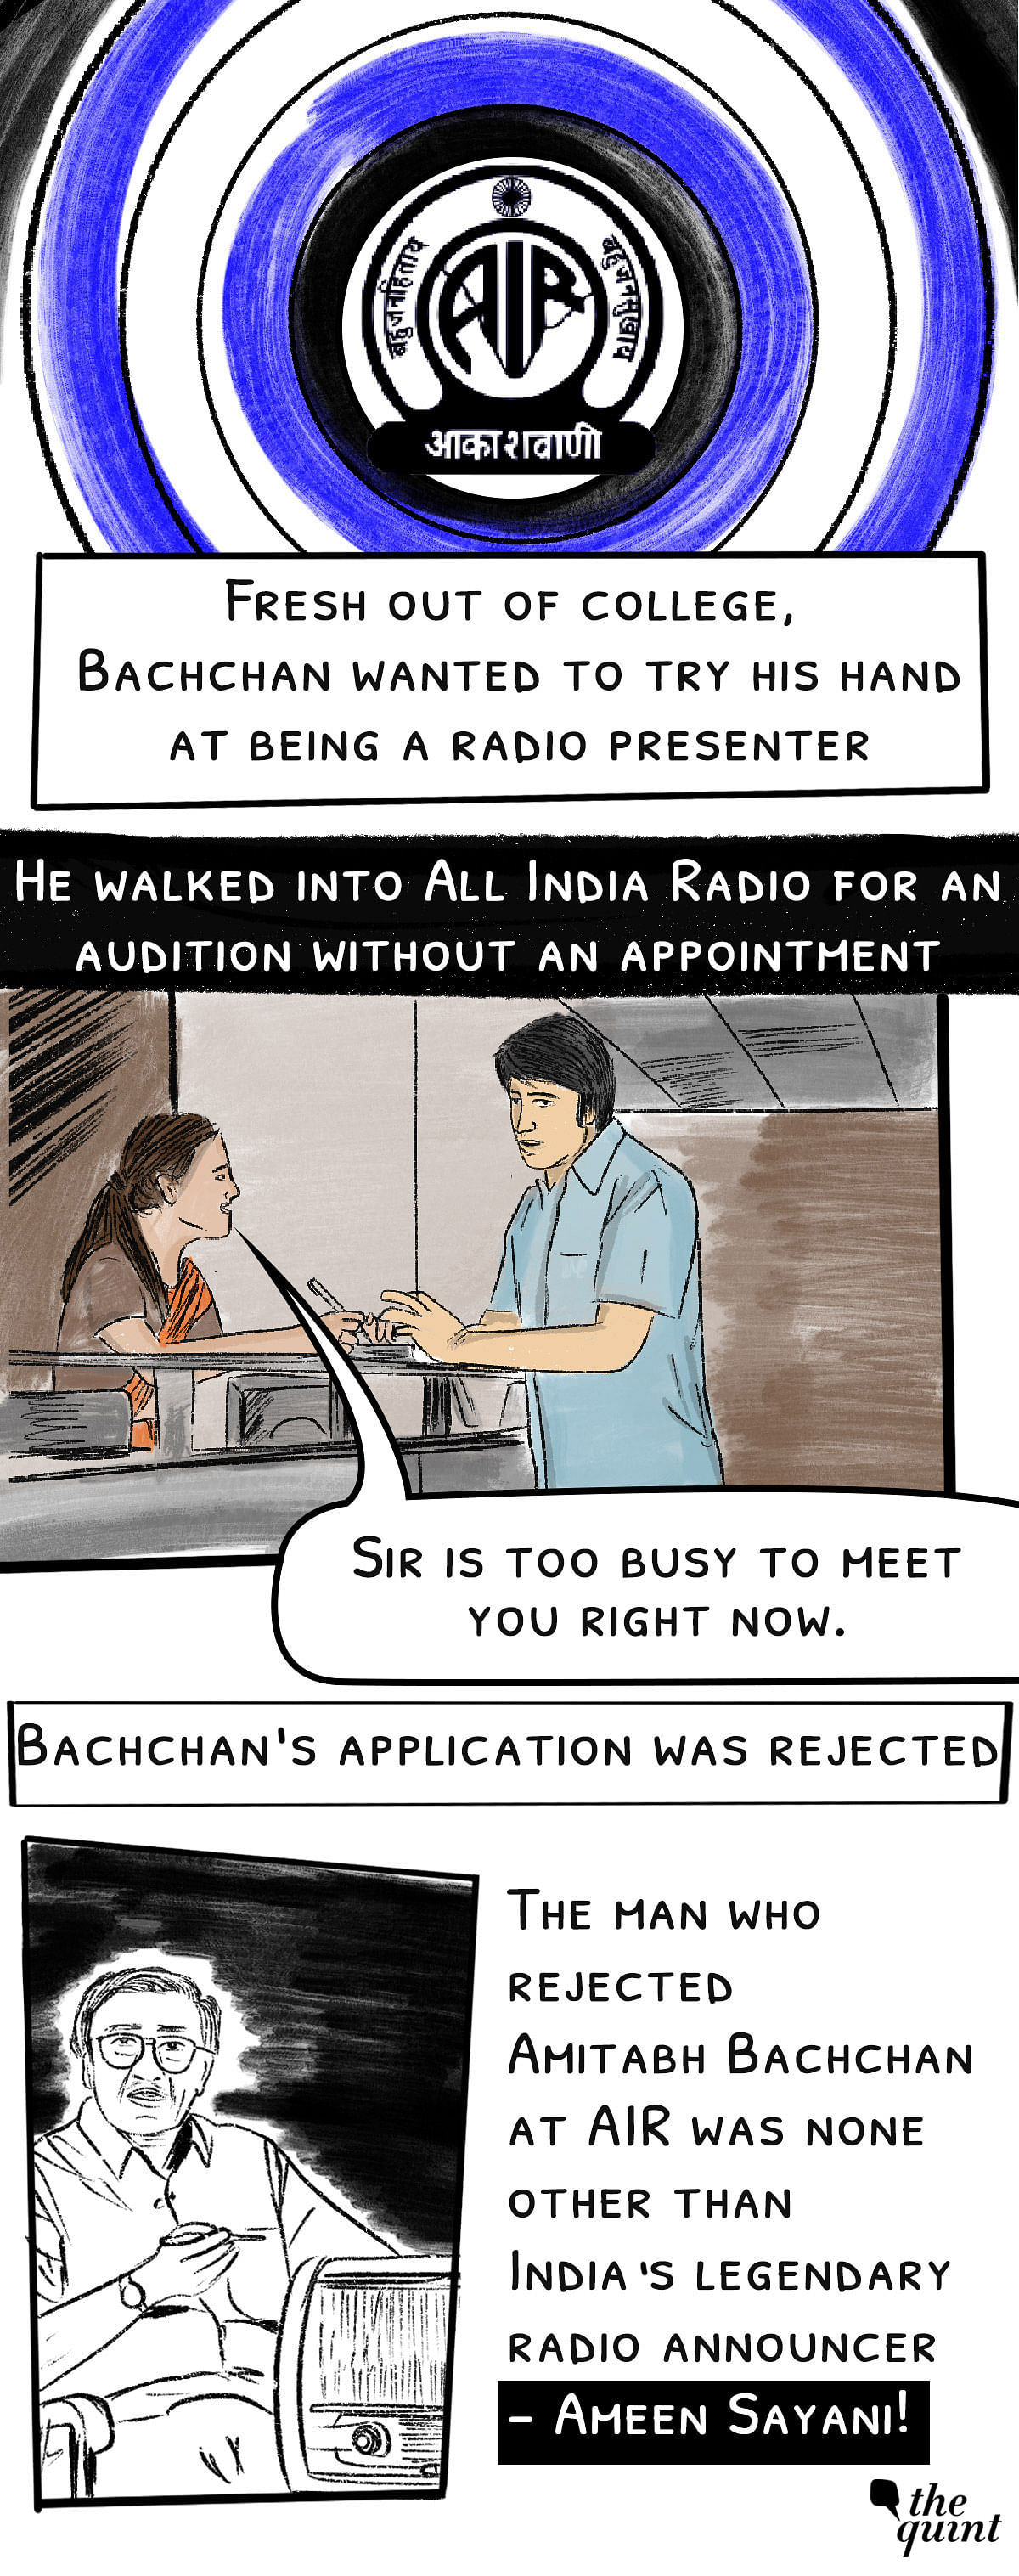 Amitabh Bachchan’s anecdotes as told by himself in his blogs. 